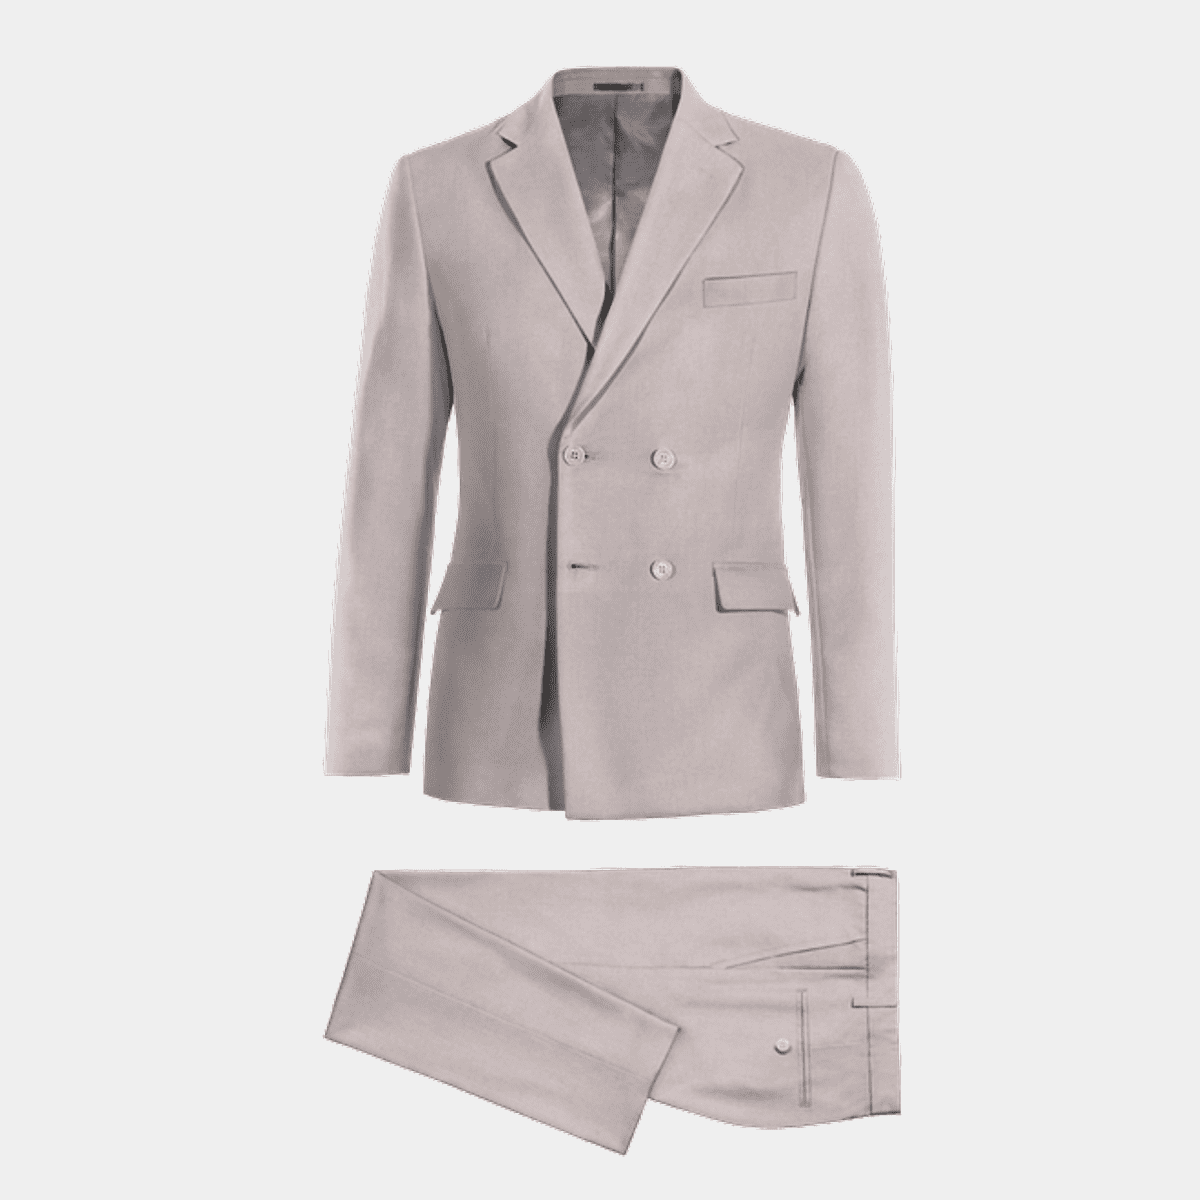 Light grey 4 buttons double-breasted year-round Suit